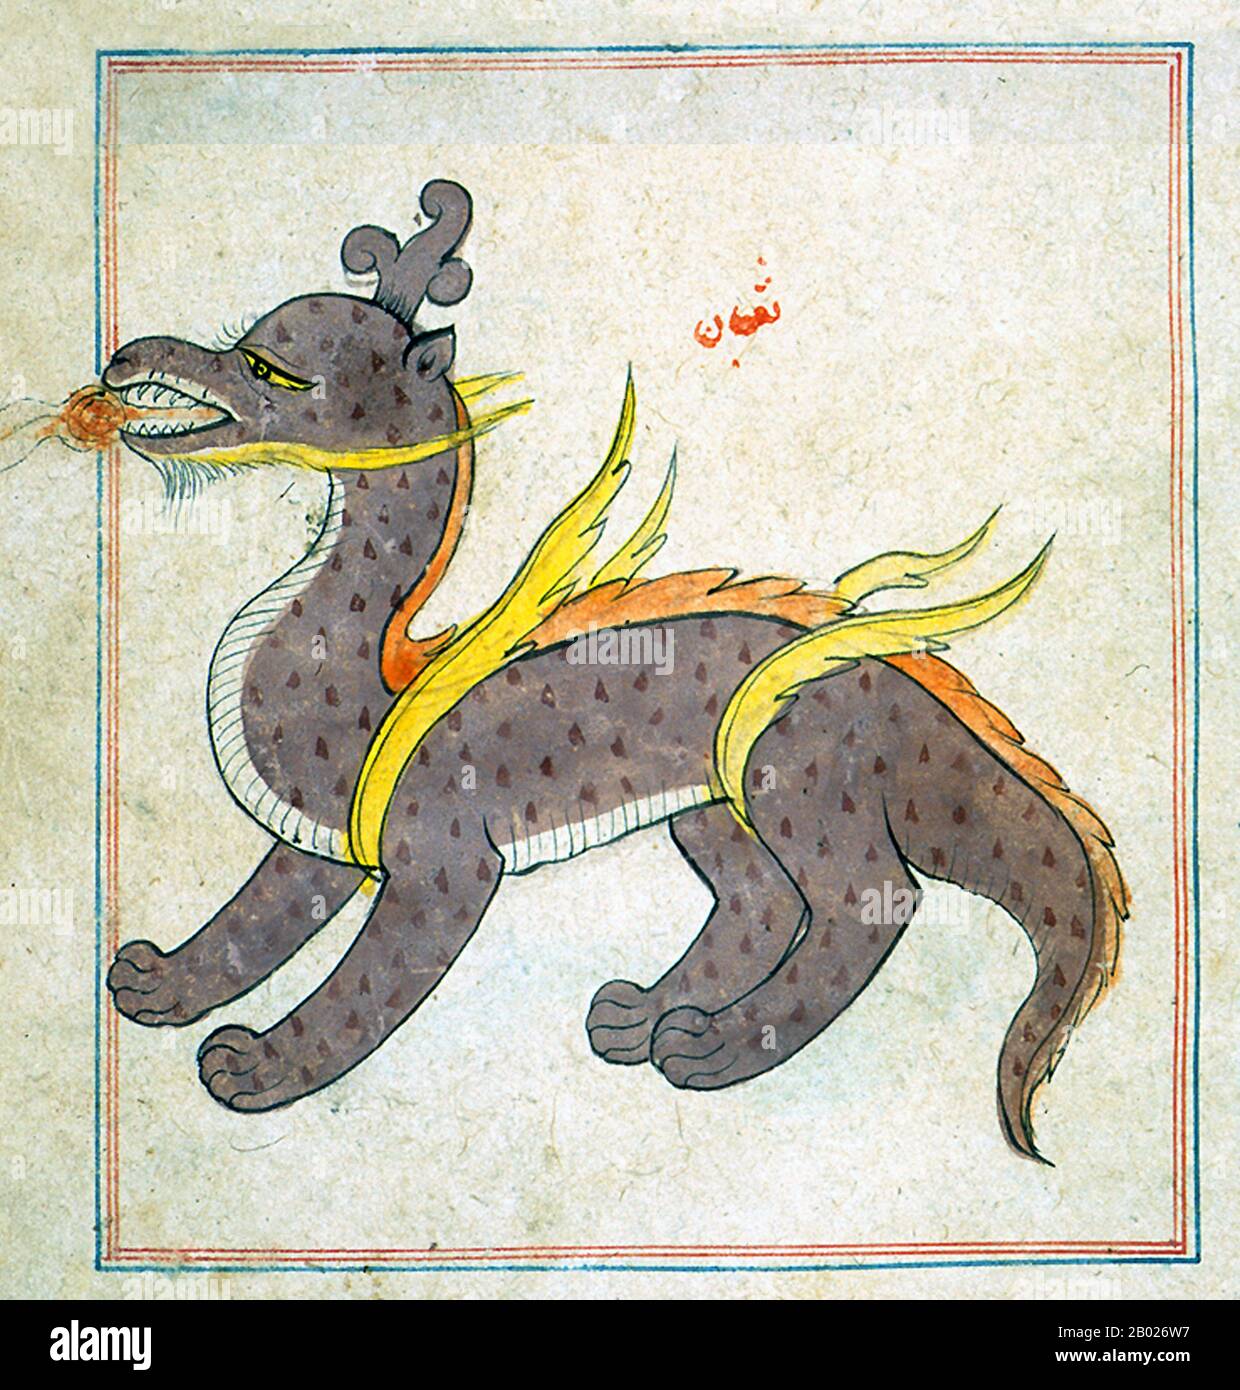 A dragon (thu‘ban), from a copy of ‘Ajā’ib al-makhlūqāt wa-gharā’ib al-mawjūdāt (Marvels of Things Created and Miraculous Aspects of Things Existing) by al-Qazwīnī (d. 1283/682).  Neither the copyist nor illustrator is named, and the copy is undated. The nature of paper, script, ink, illumination, and illustrations suggest that it was produced in provincial Mughal India, possibly the Punjab, in the 17th century. Stock Photo